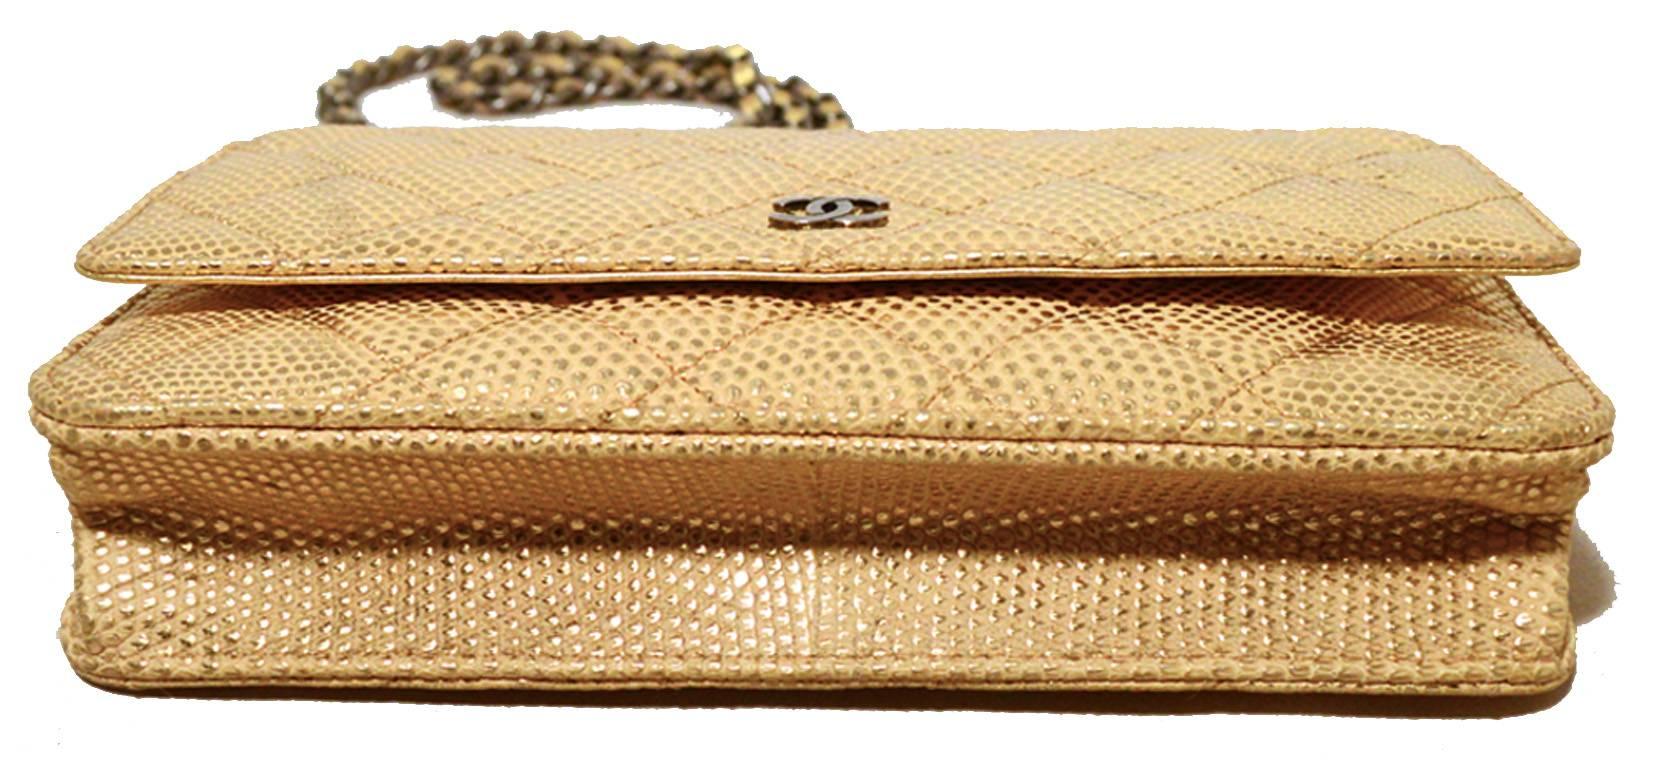 chanel gold wallet on chain